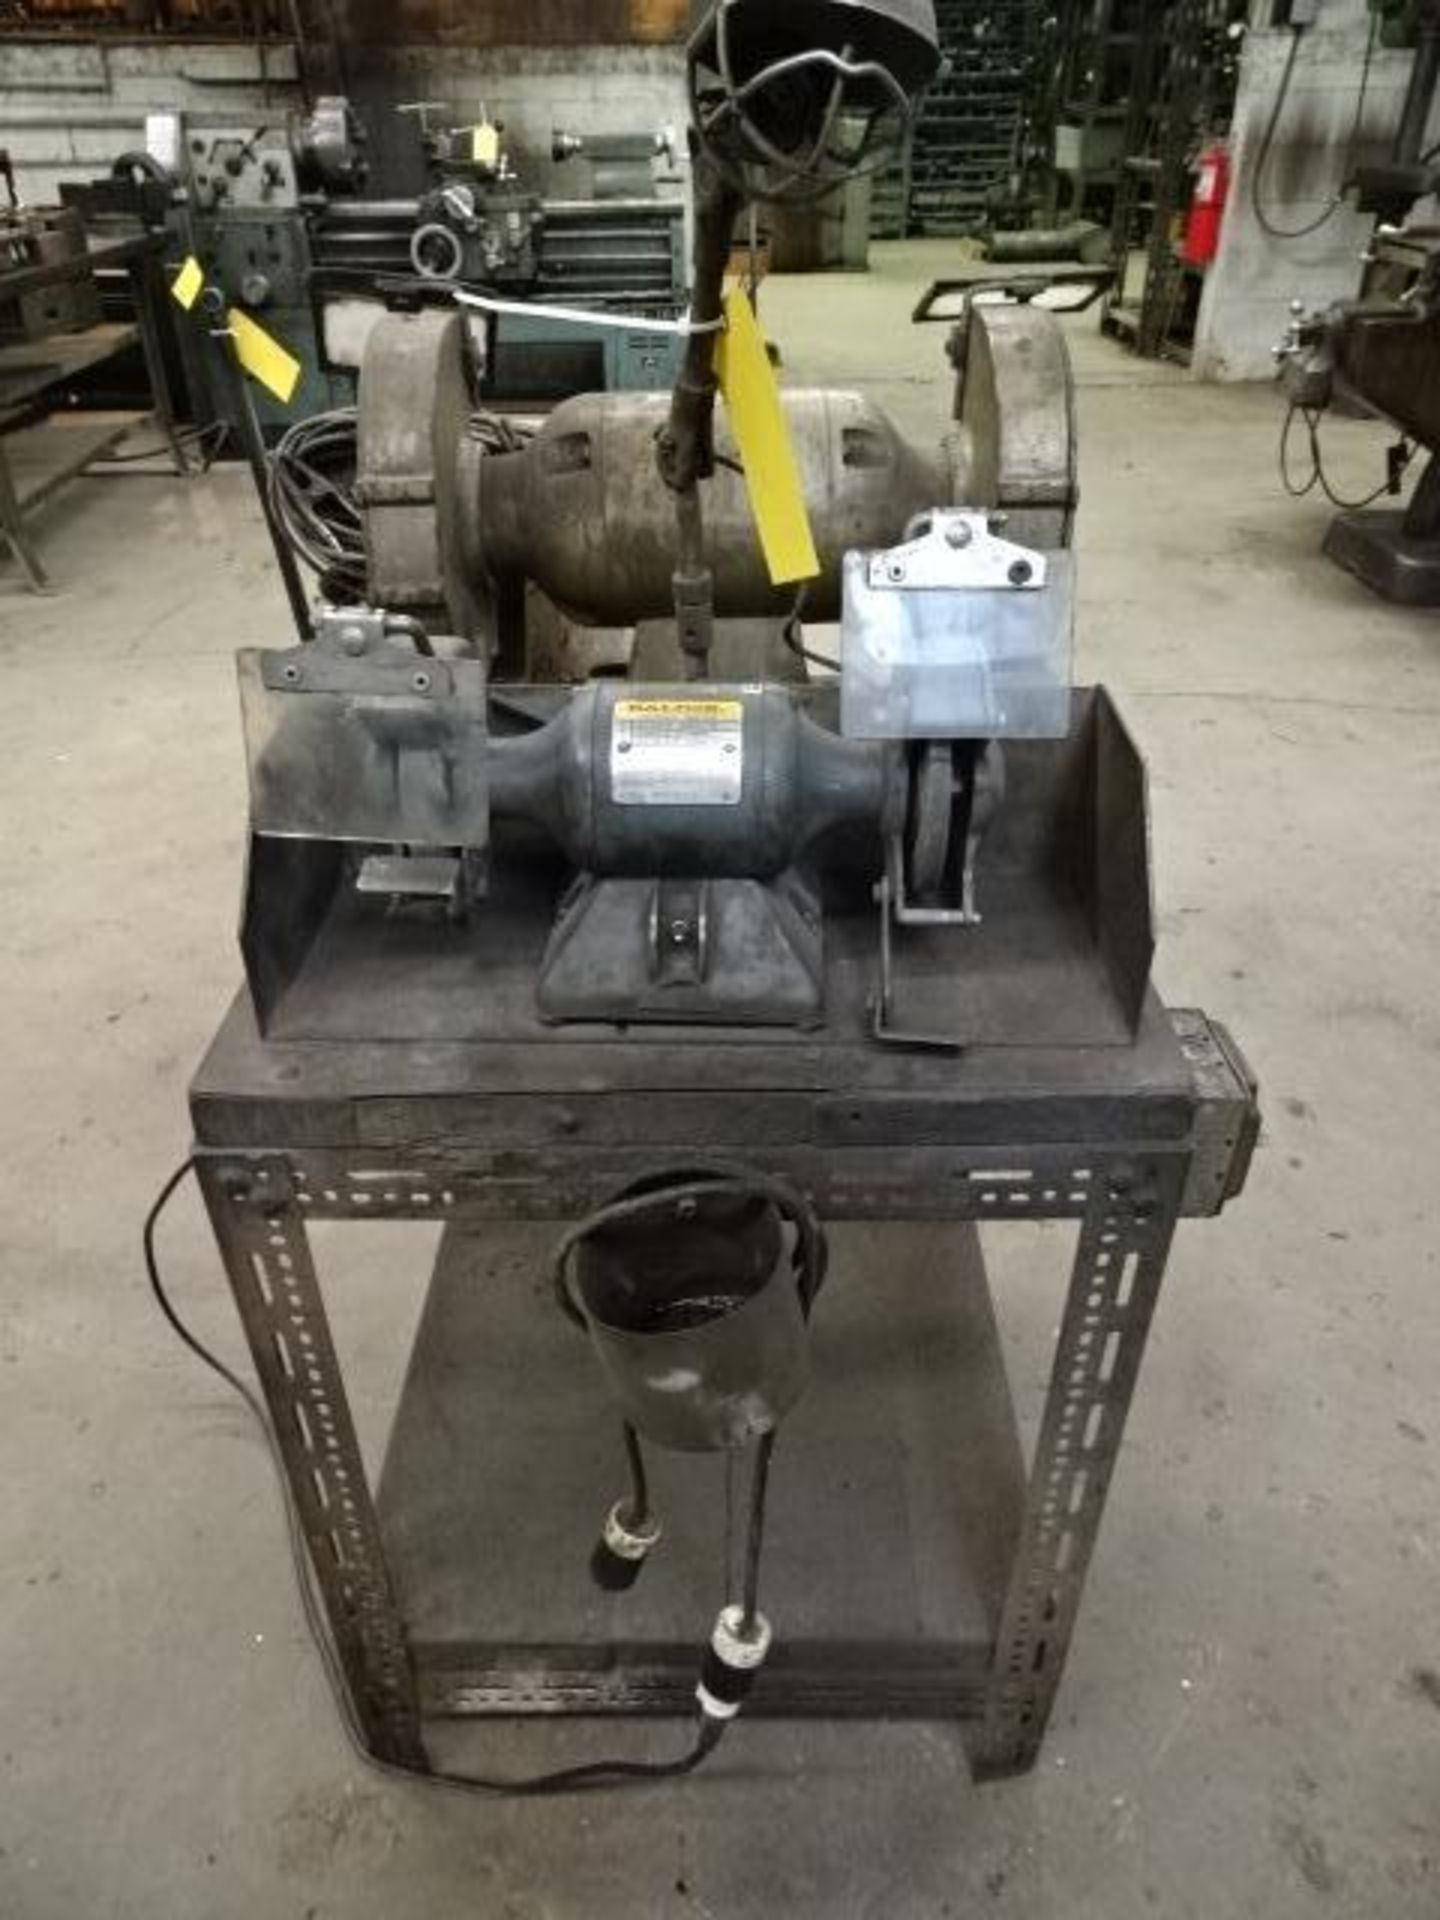 LOT: (2) Grinders Consisting of: (1) Craft 2 HP Double Ended Grinder and (1) Baldor 1/3 HP Double En - Image 2 of 4